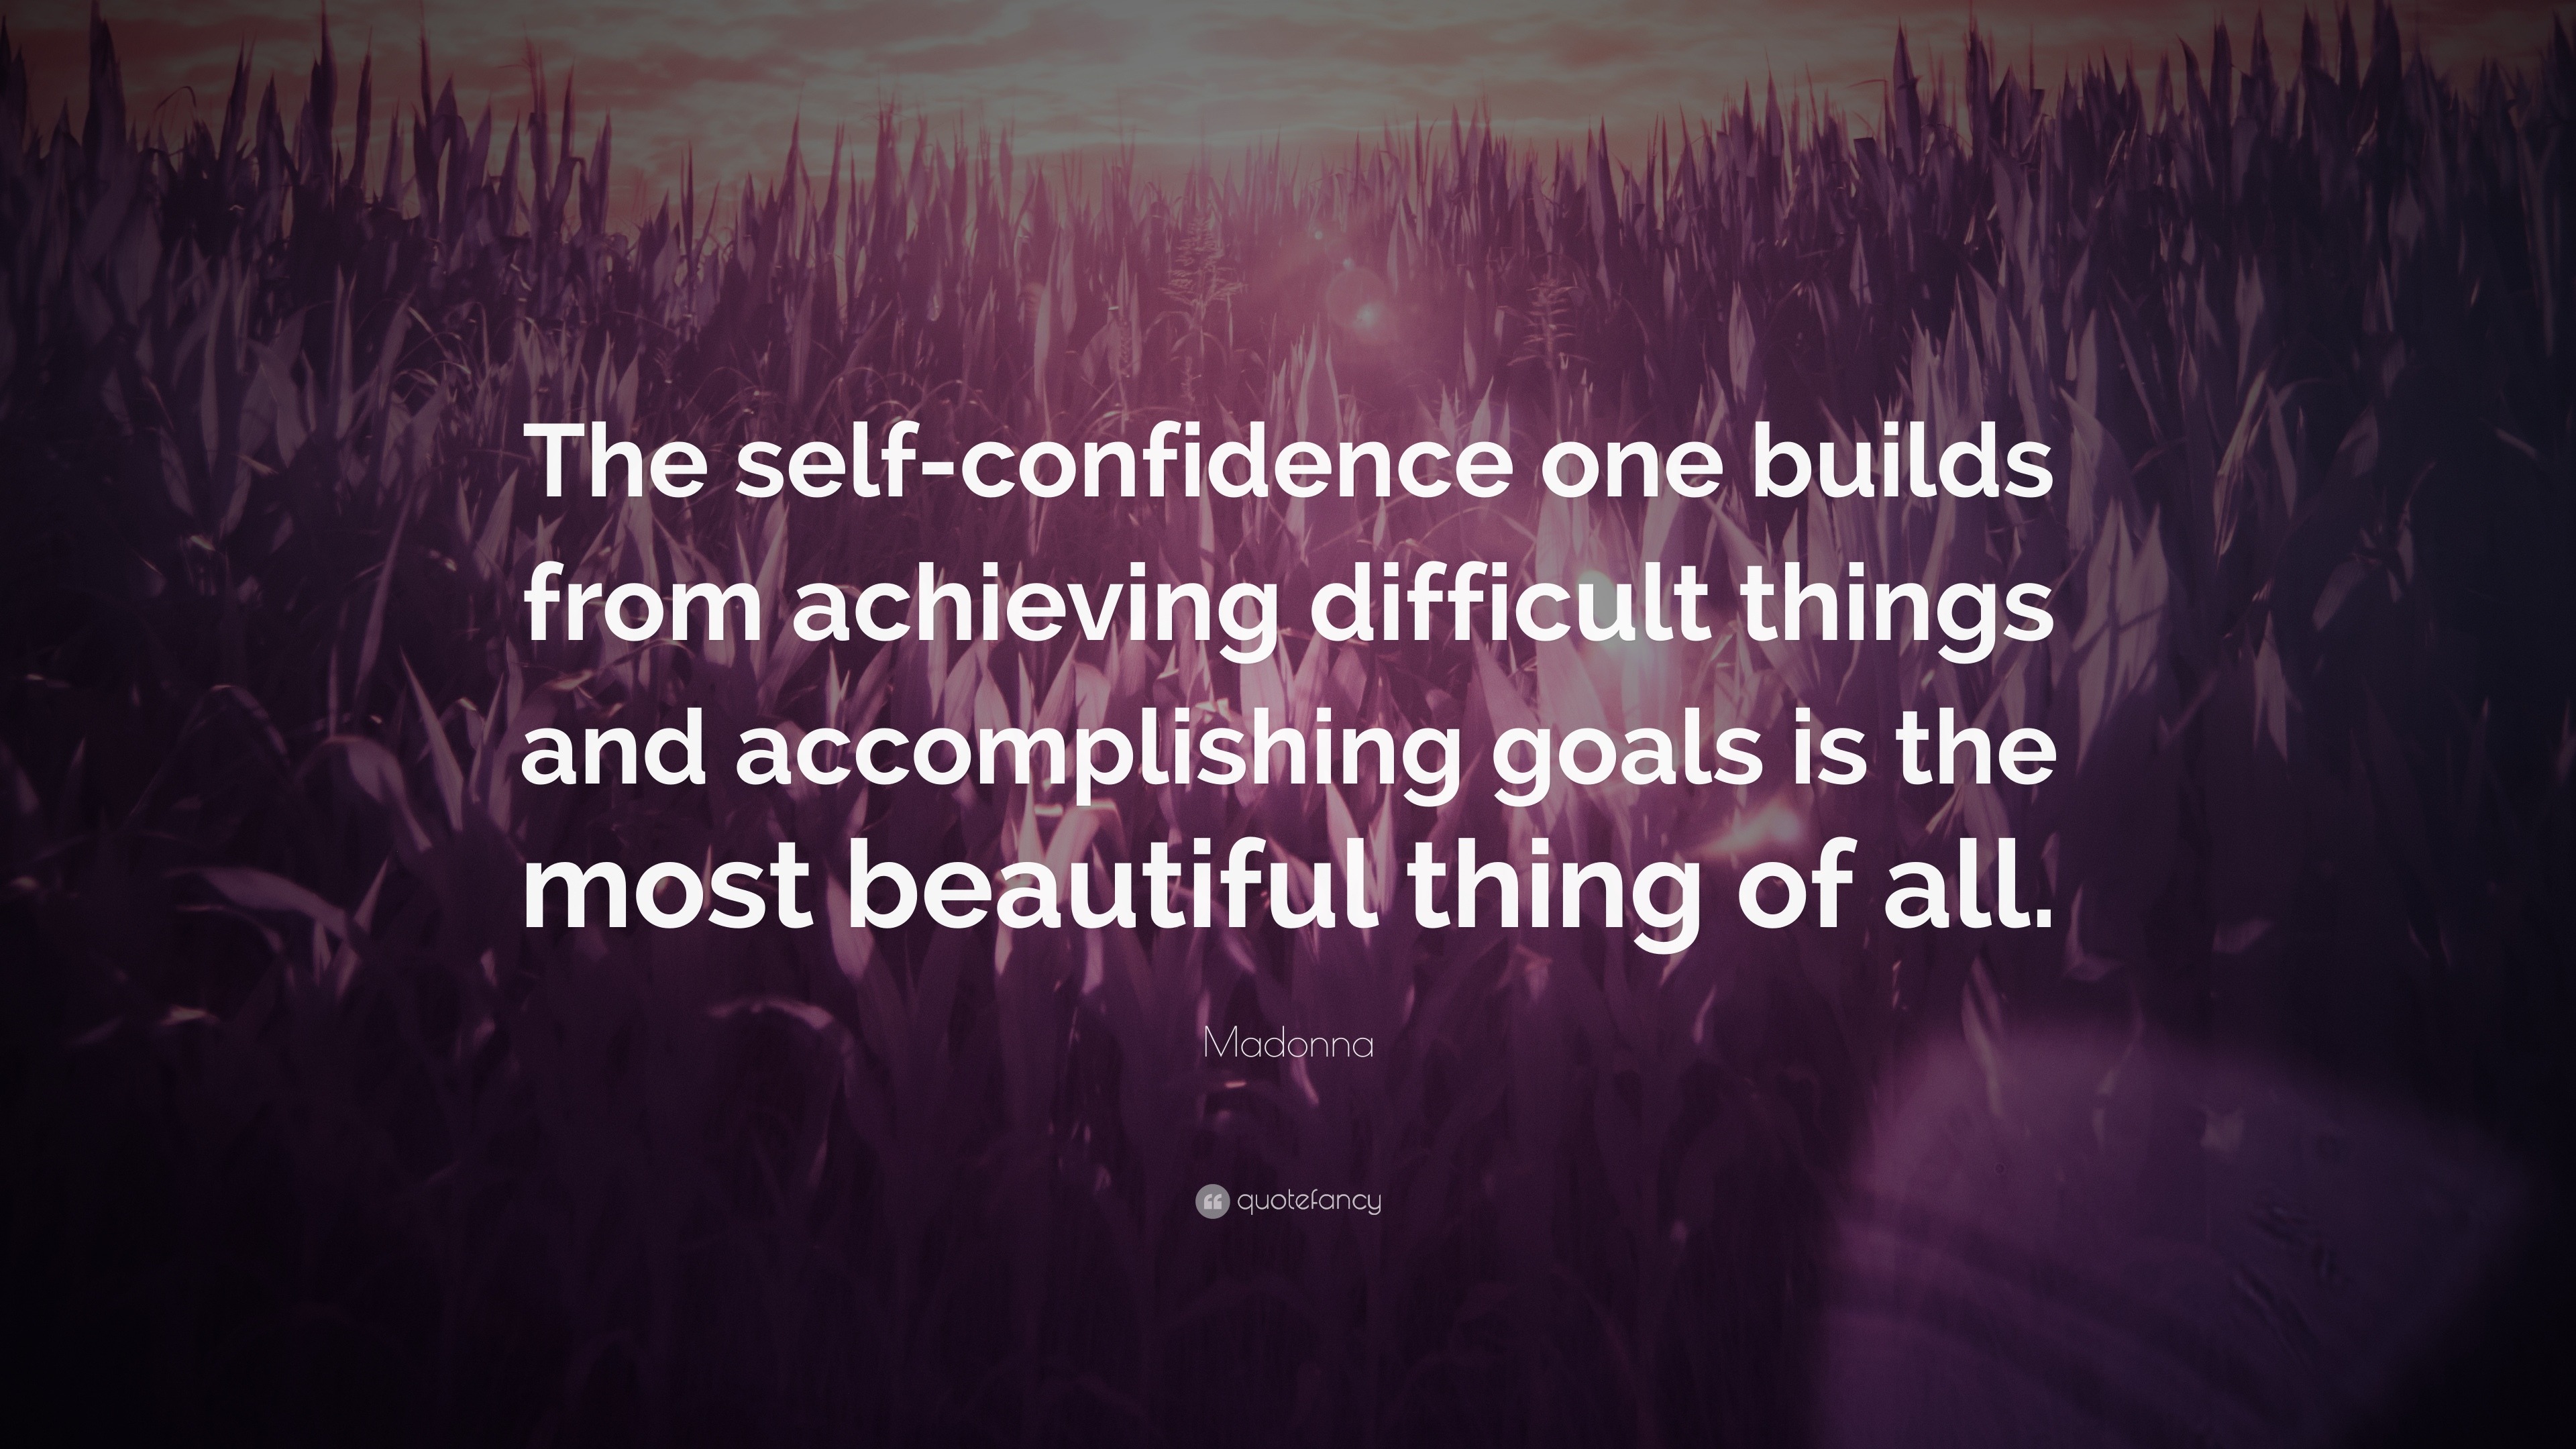 Confidence Quotes By Famous People